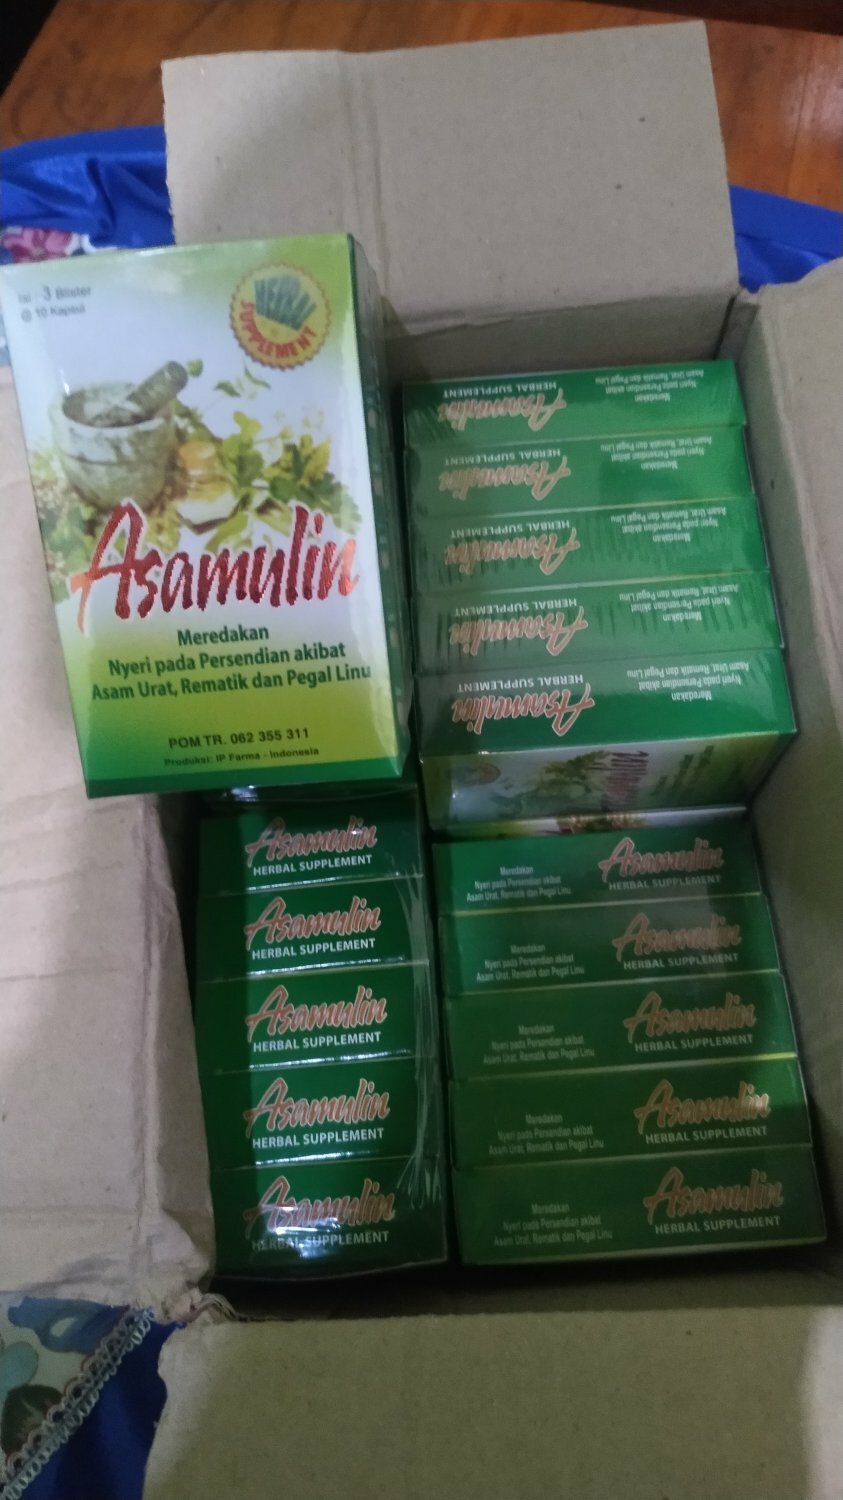 Asamulin Original Herbal For Relieve Gout Rheumatics, Cholesterol, Blood Clots, Joint Pain And Backpain